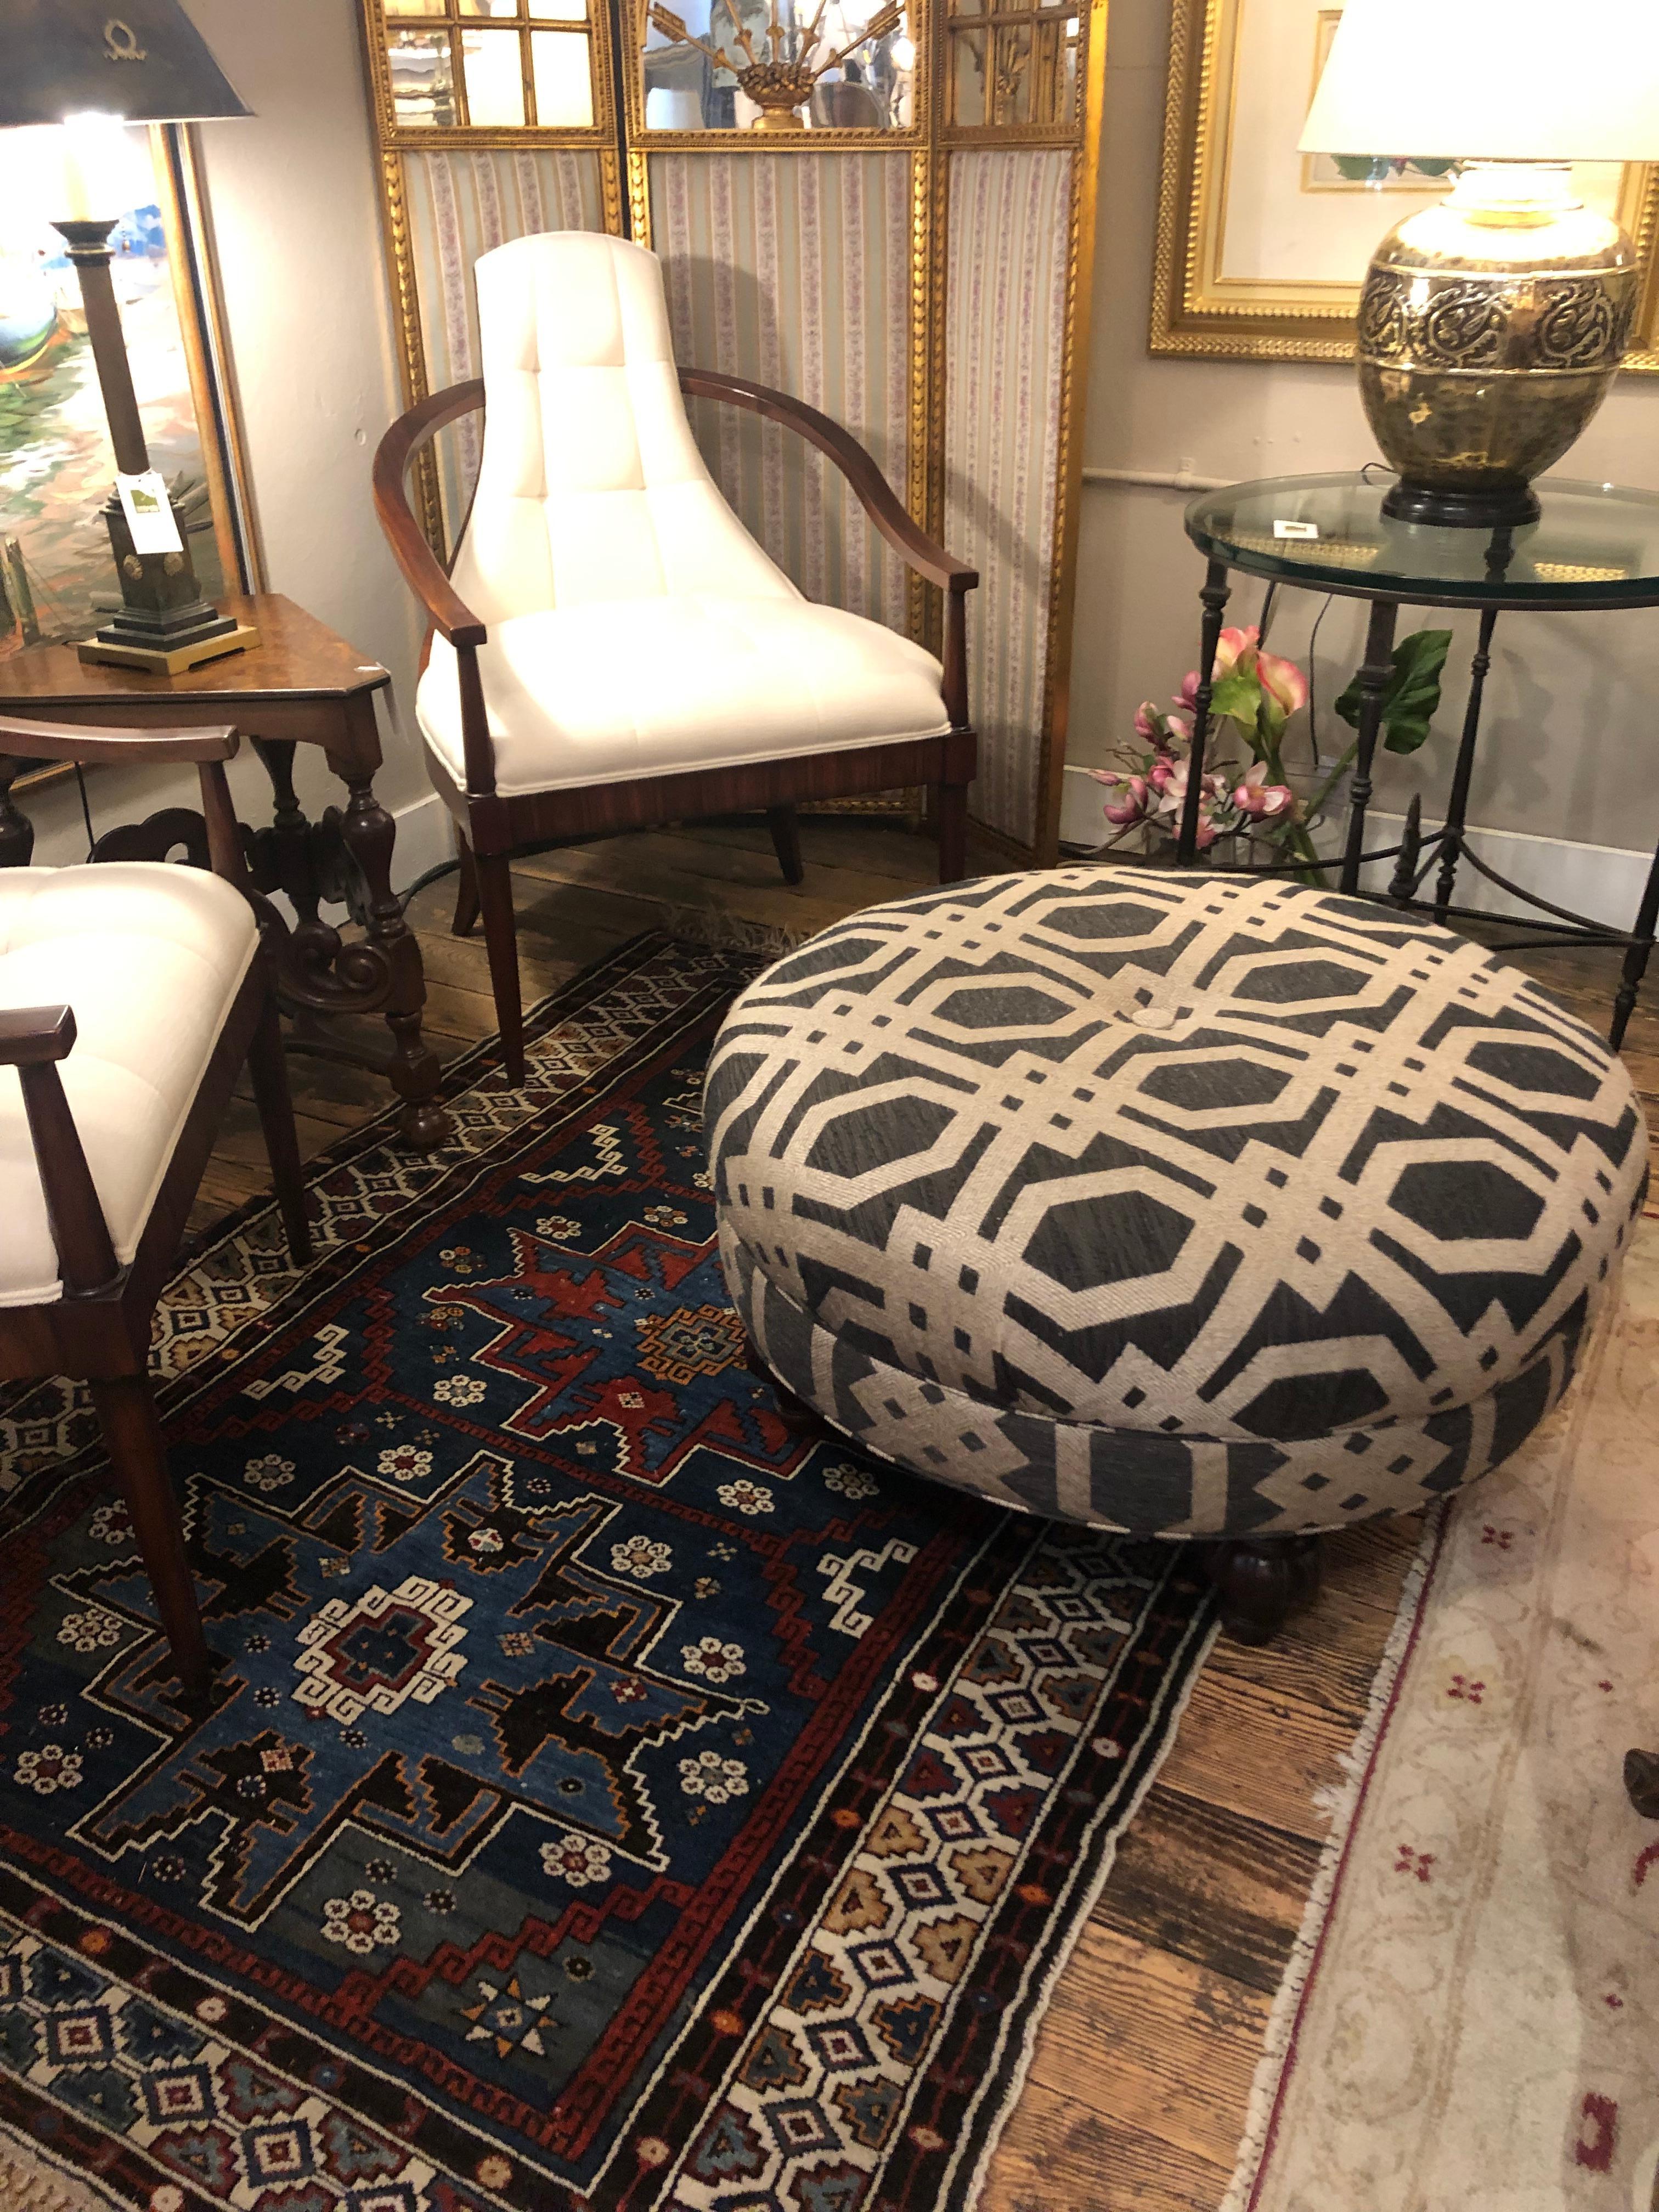 A striking versatile round ottoman upholstered in handsome blue and sandy beige textured lattice pattern fabric and resting on mahogany bun feet.